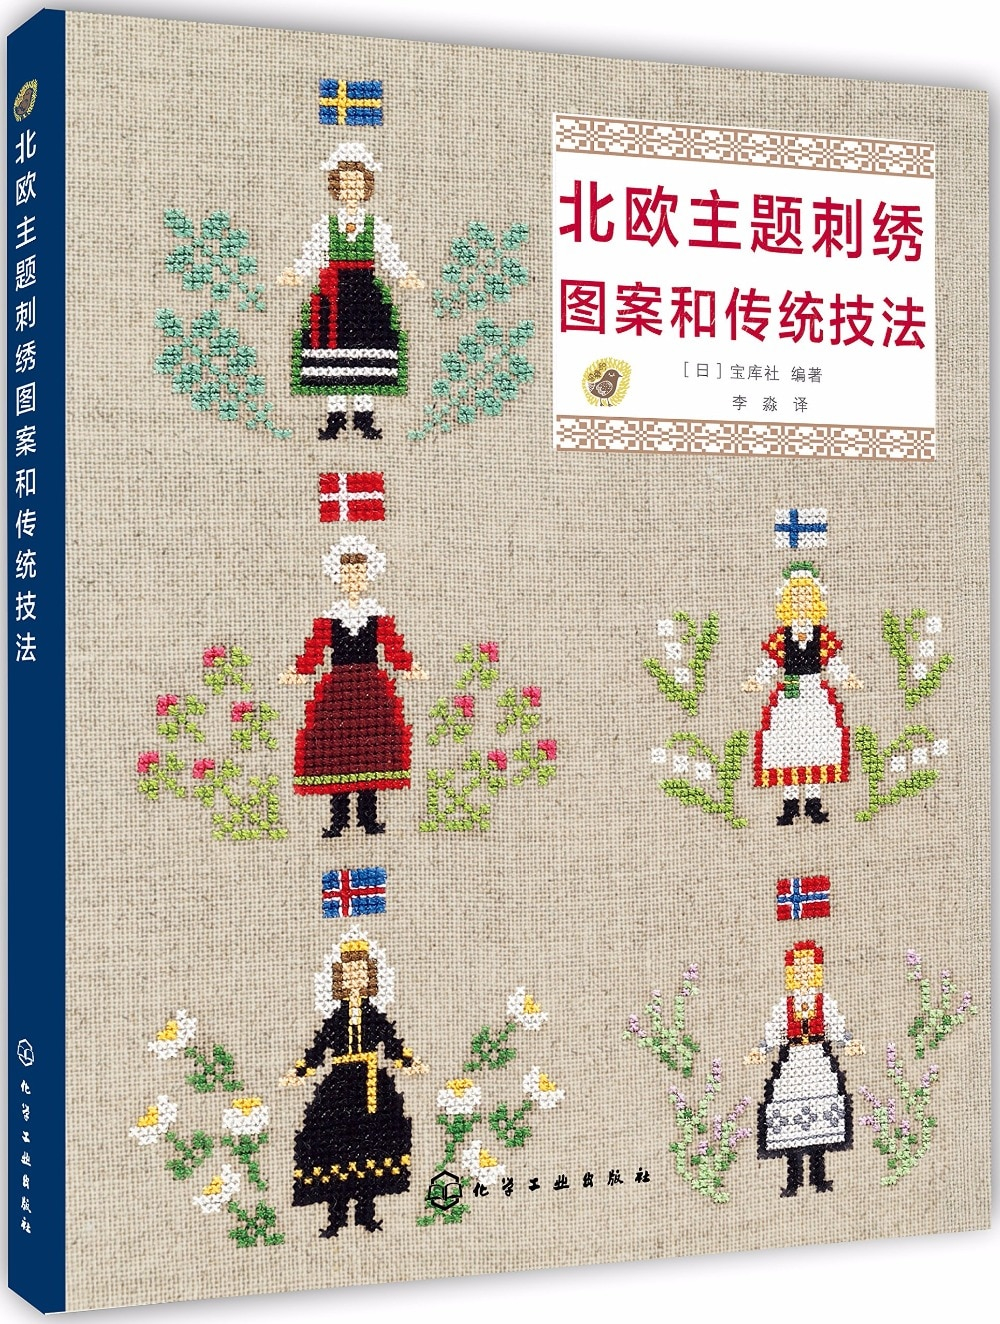 Embroidery Pattern Books Nordic Embroidery Motifs And Traditional Techniques Book With 106